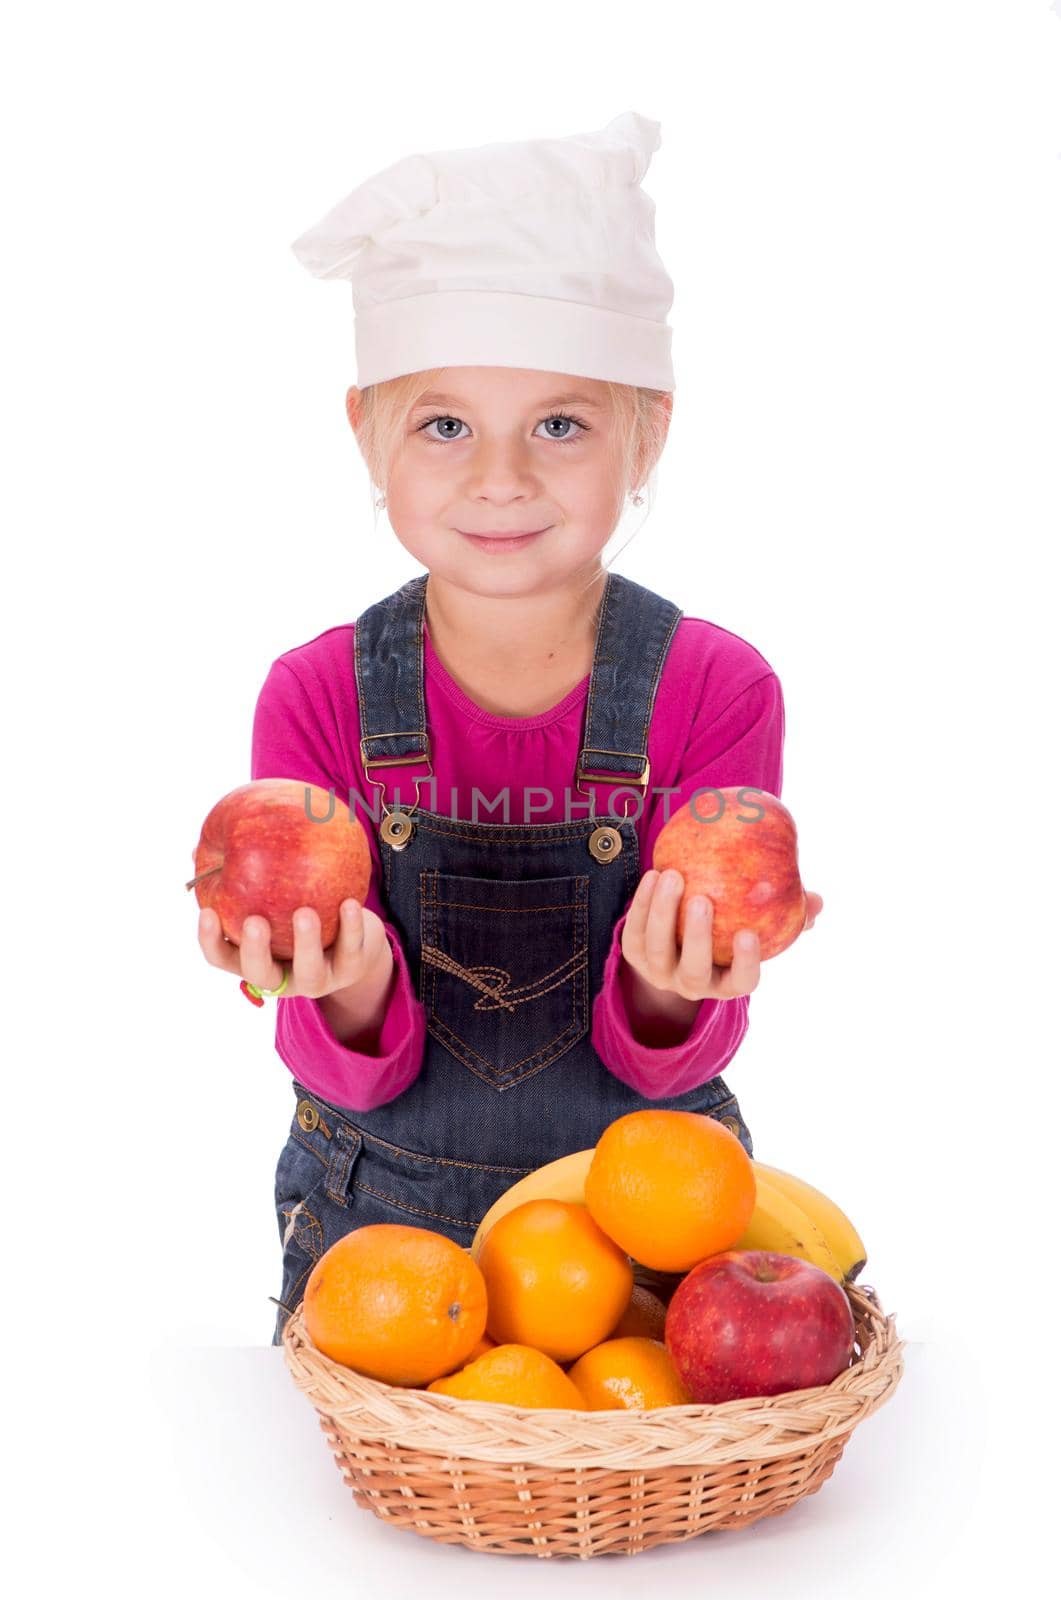 Close-up portrait of a little girl holding fruits - apples, bananas and oranges. Isolated on a light background. by aprilphoto